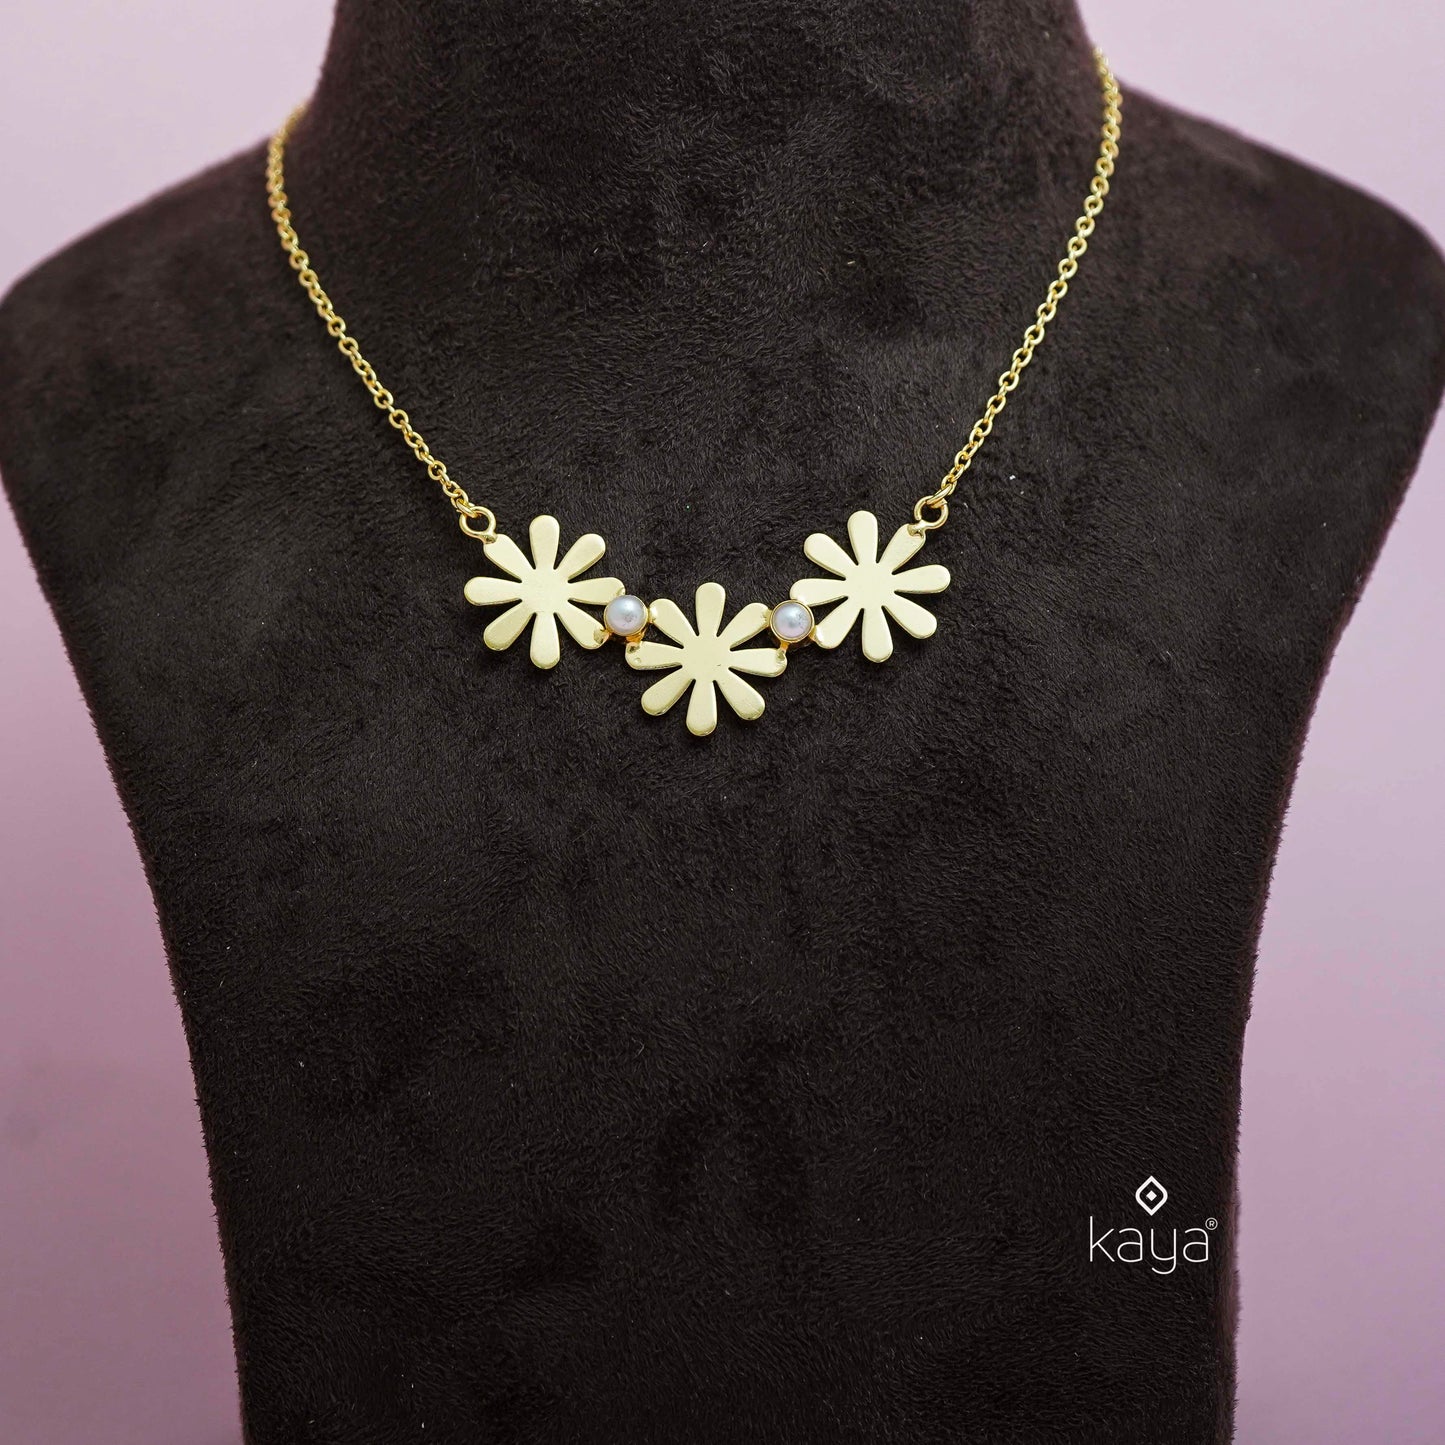 AS101230 - Elegant Flower Necklace with Pearls